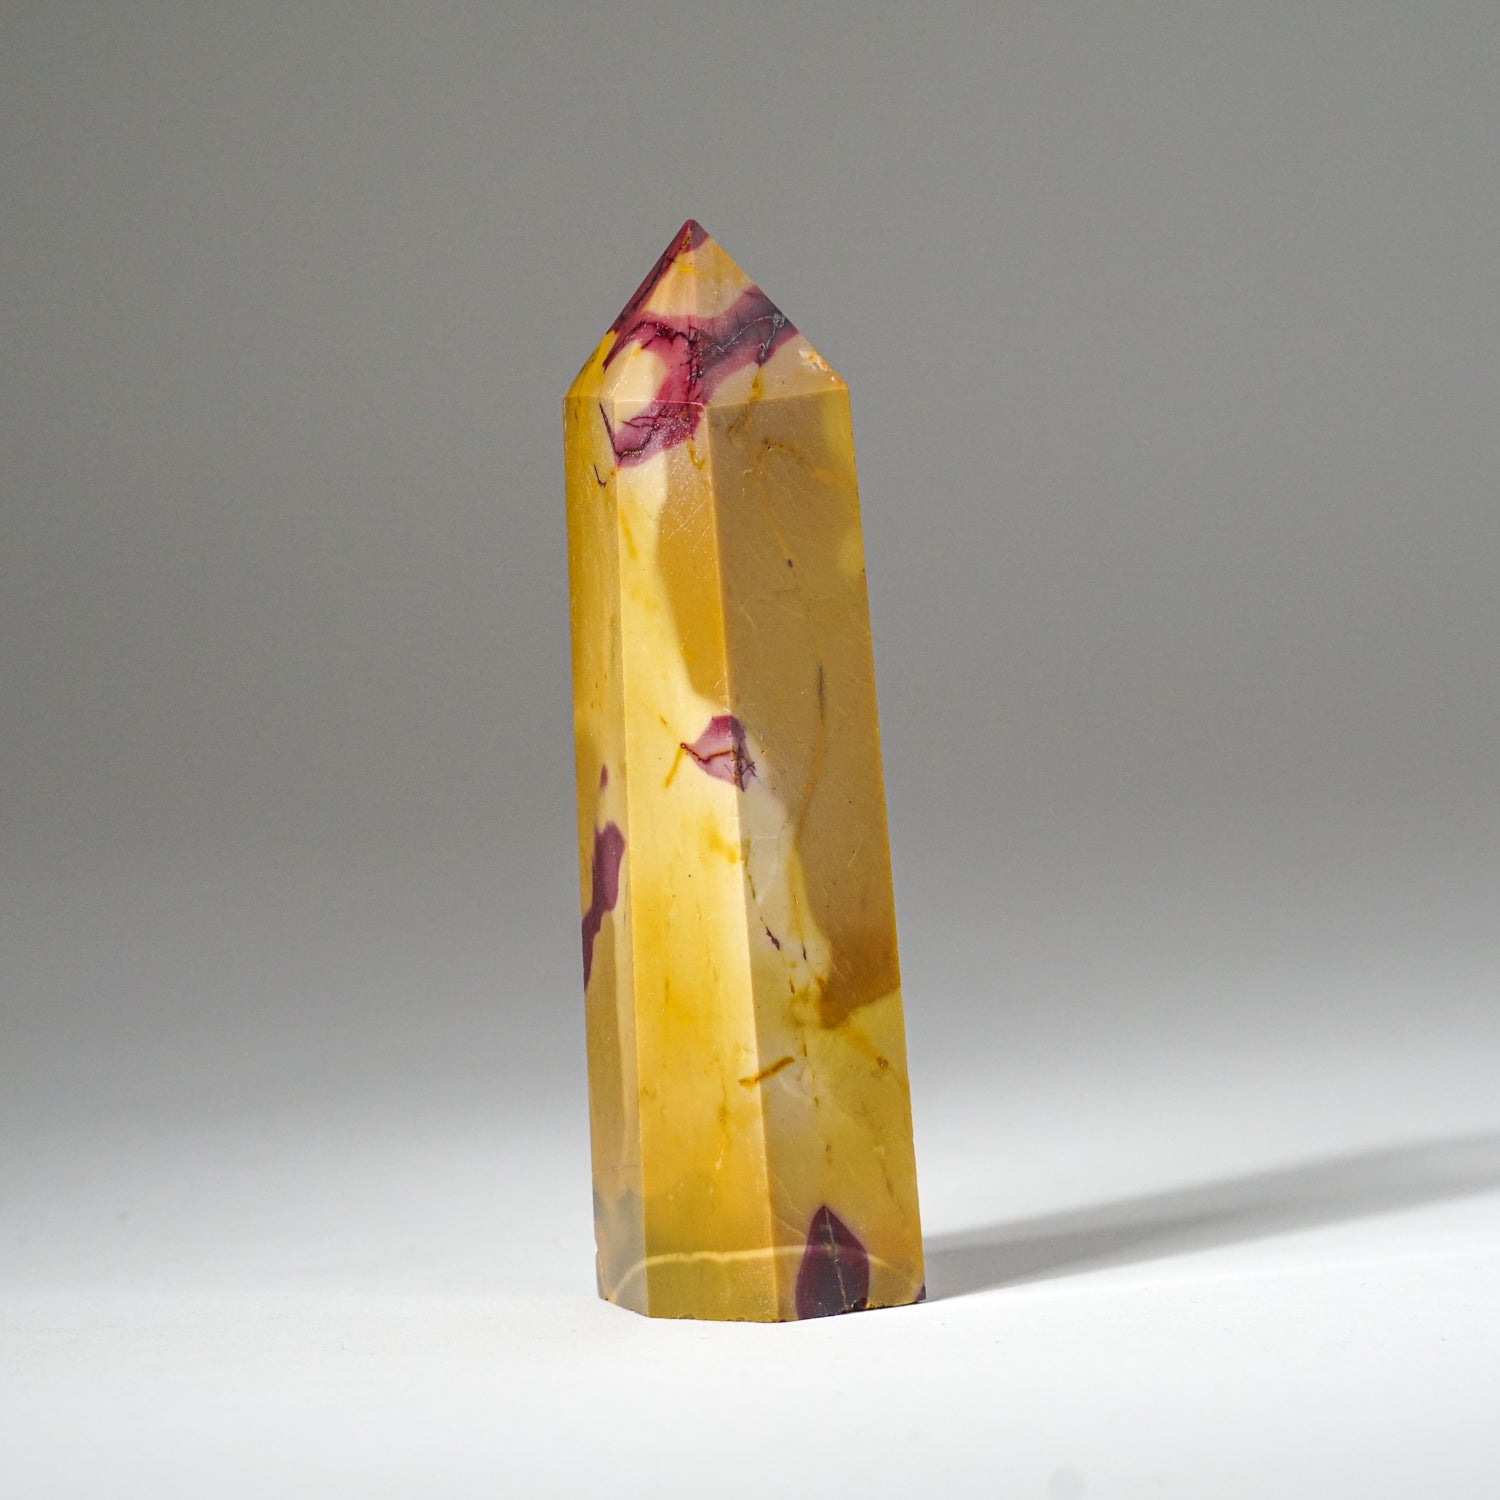 Genuine Polished Mookaite Point from Madagascar (110 grams)